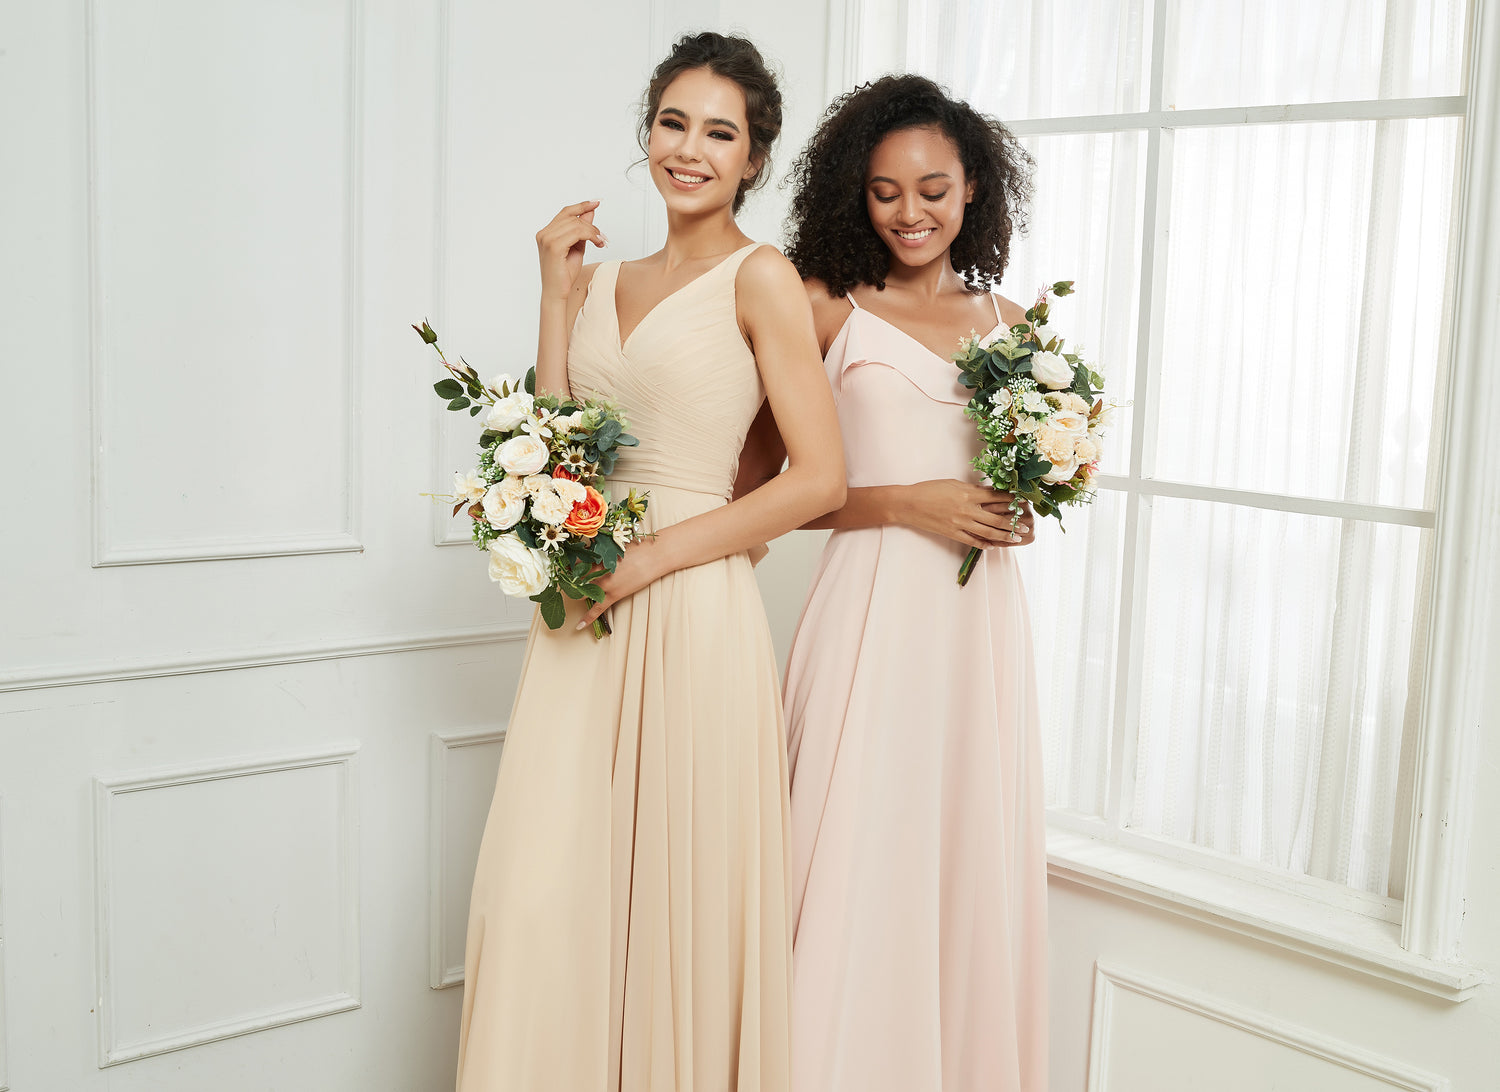 Chiffon dresses are a must-have in any women's wardrobe. This lightweight fabric adds a feminine touch to any outfit. Browse any length from short to maxi chiffon in more than 70 stunning colors for any occasion at Duntery. Free Custom Size!